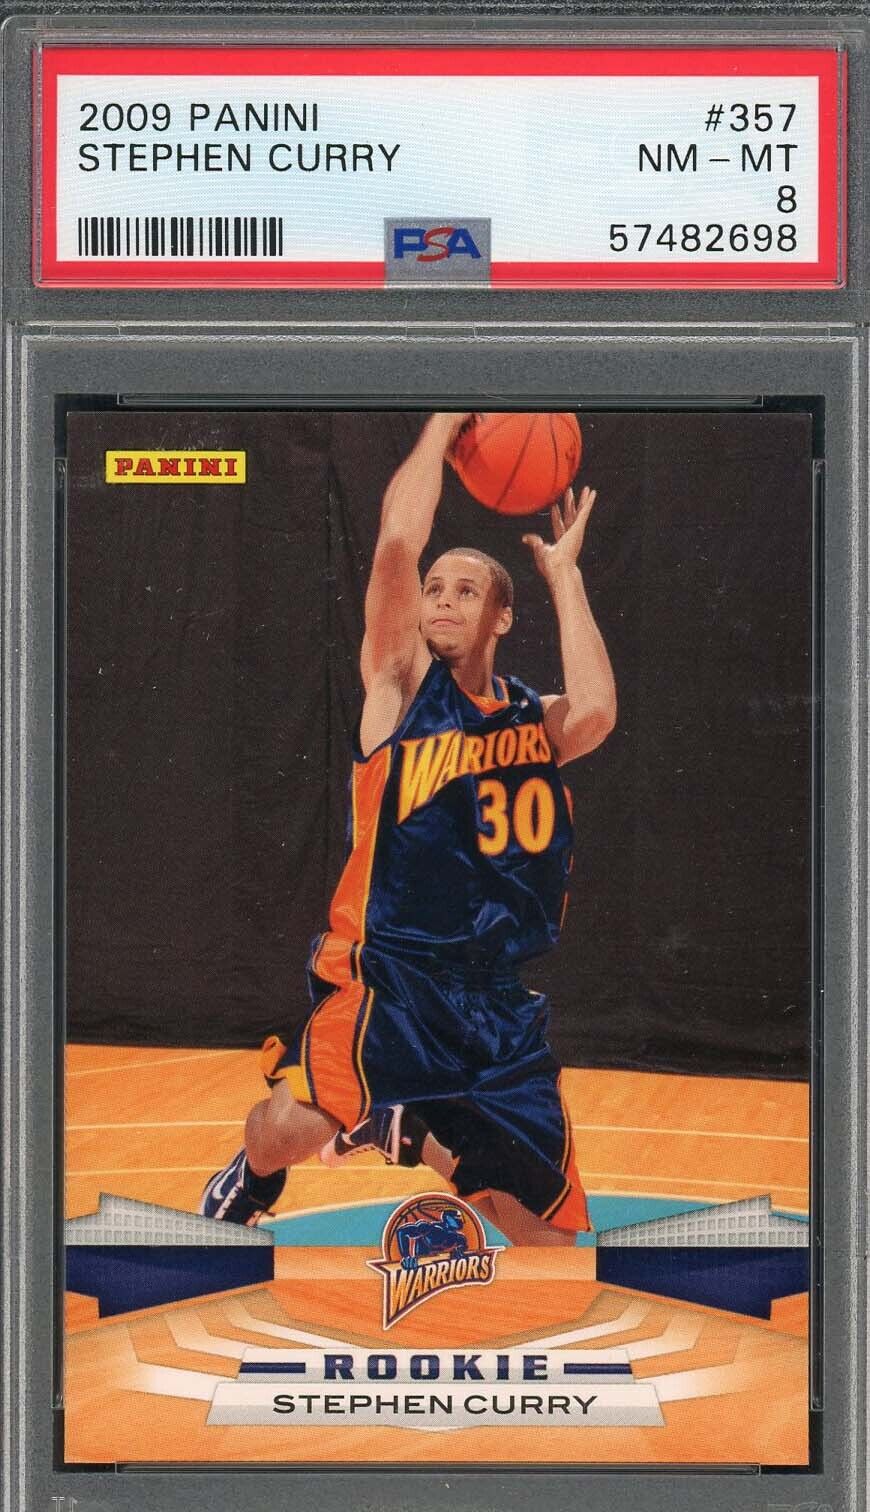 Stephen Curry 2009 Panini Basketball Rookie Card RC #357 Graded PSA 8